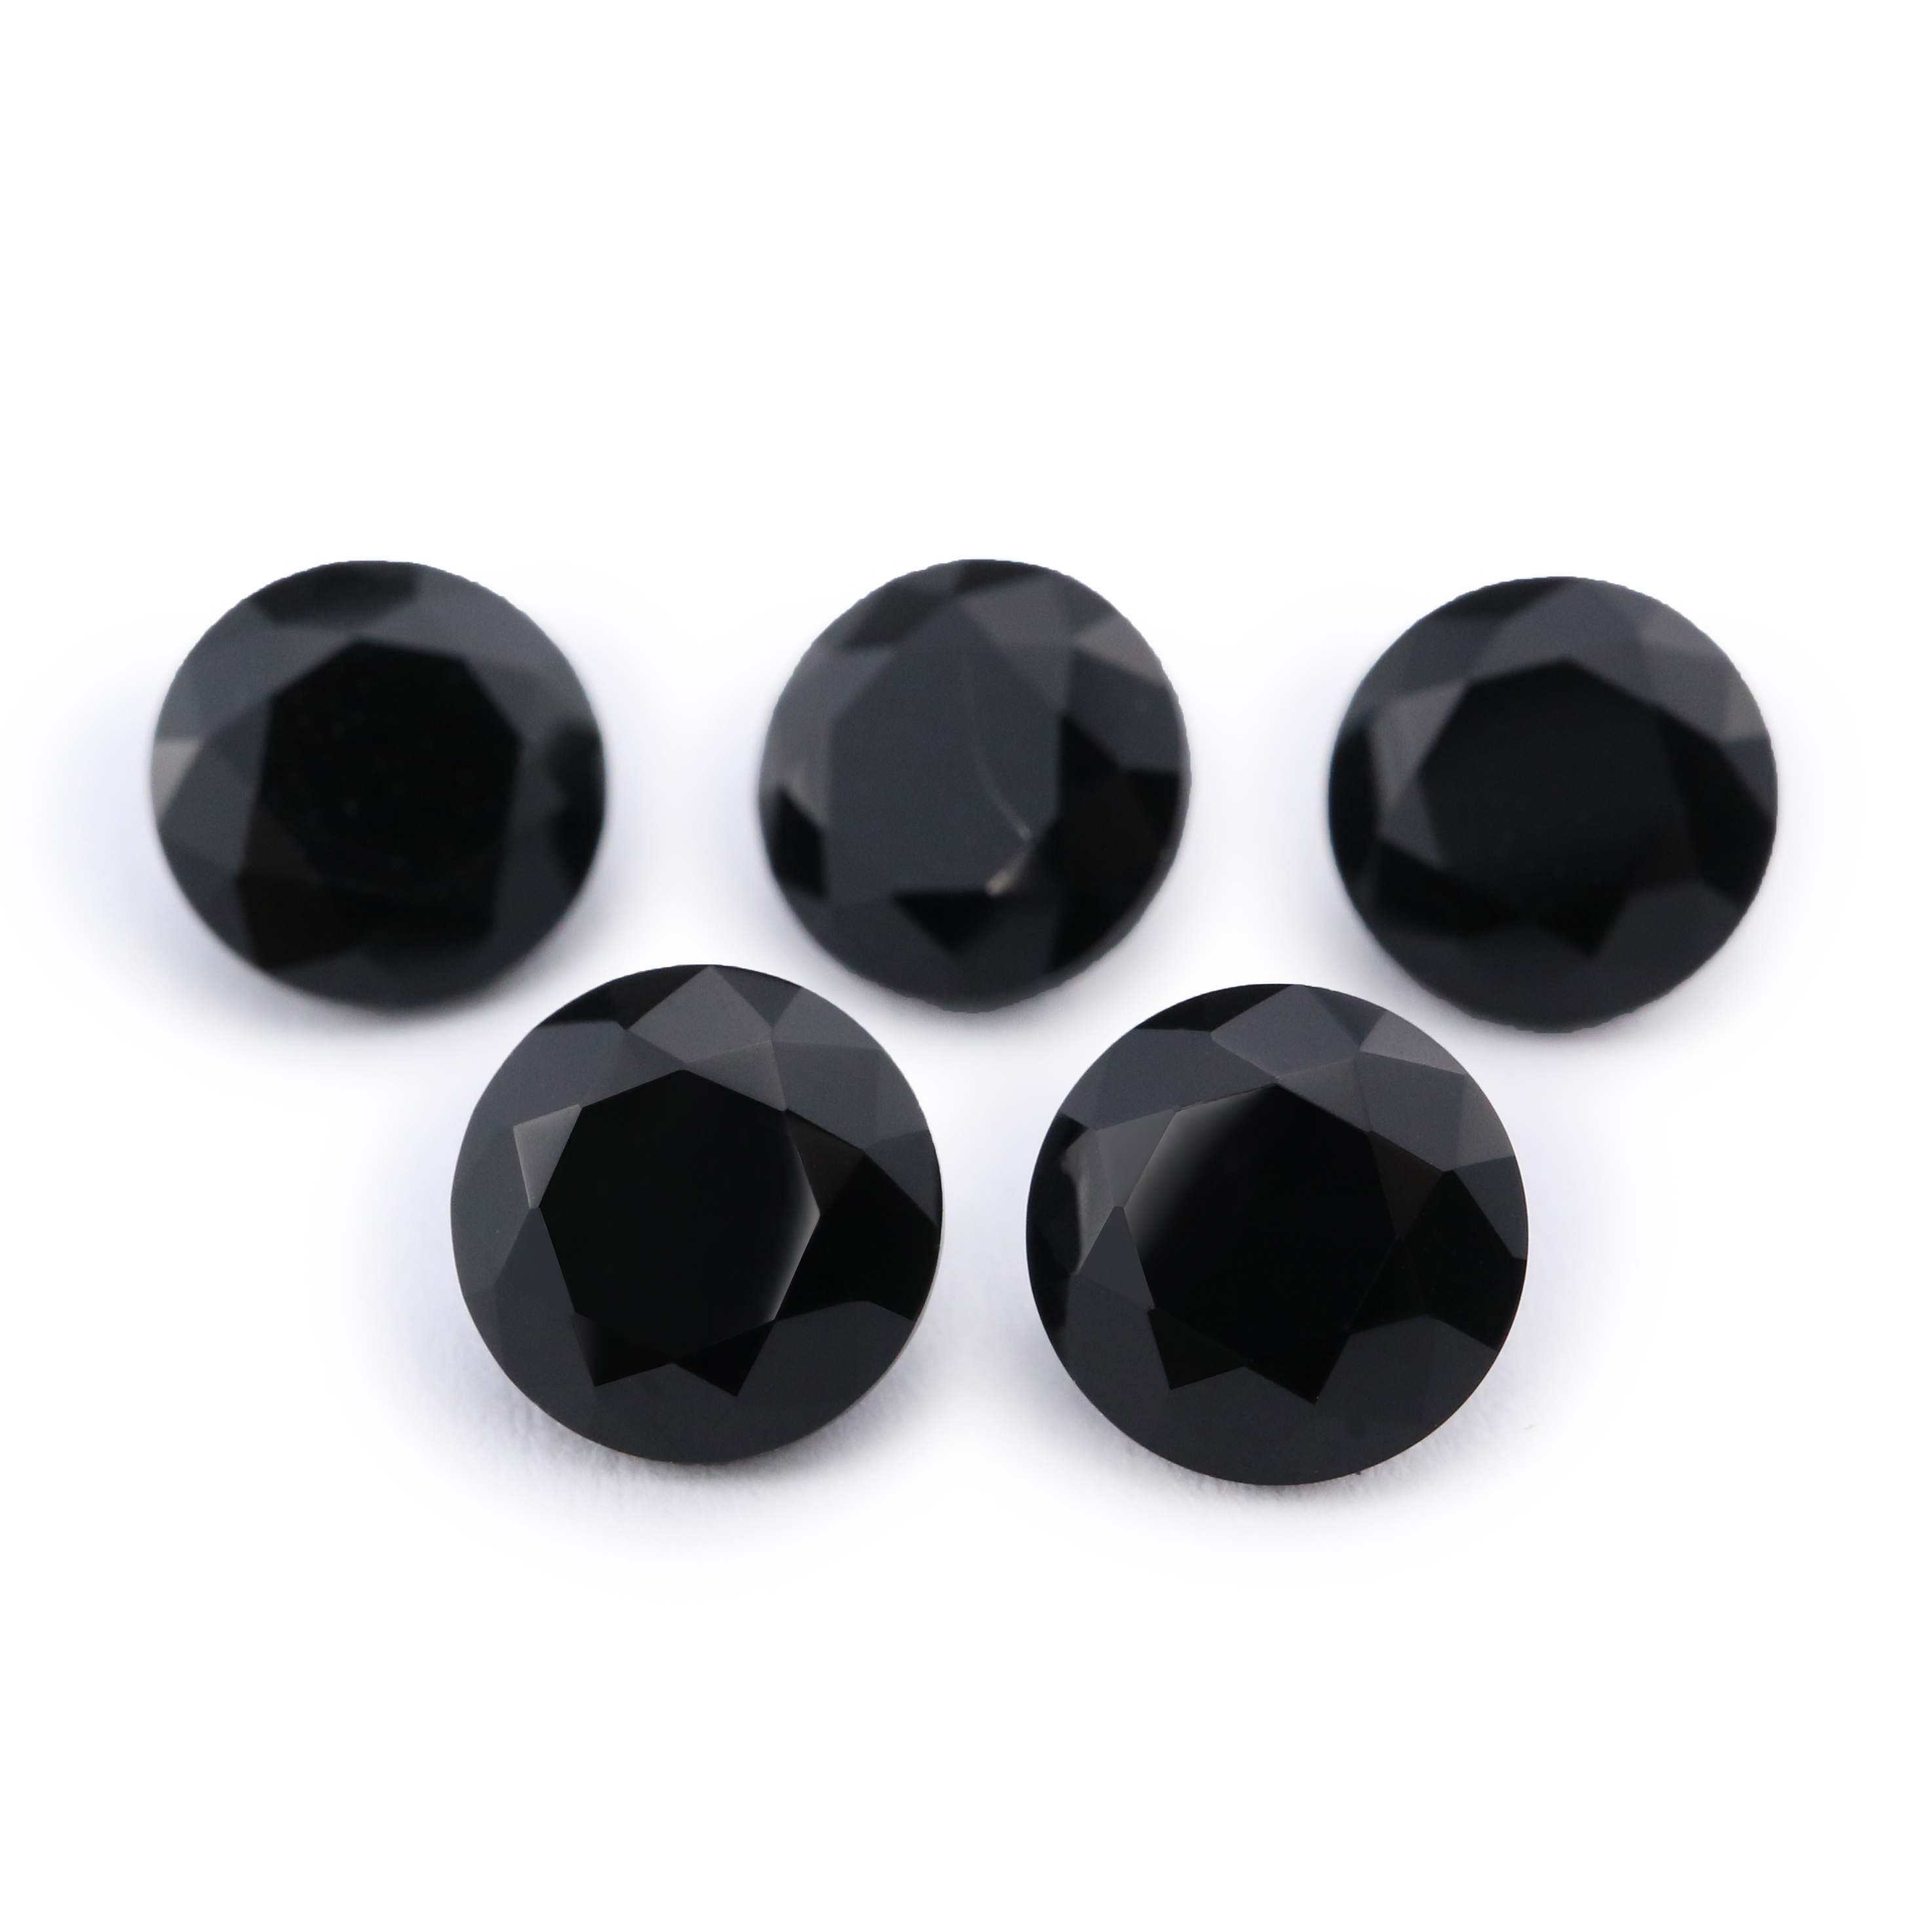 1Pcs Natural Round Black Onyx Faceted Cut Loose Gemstone Nature Semi Precious Stone DIY Jewelry Supplies 4110170 - Click Image to Close